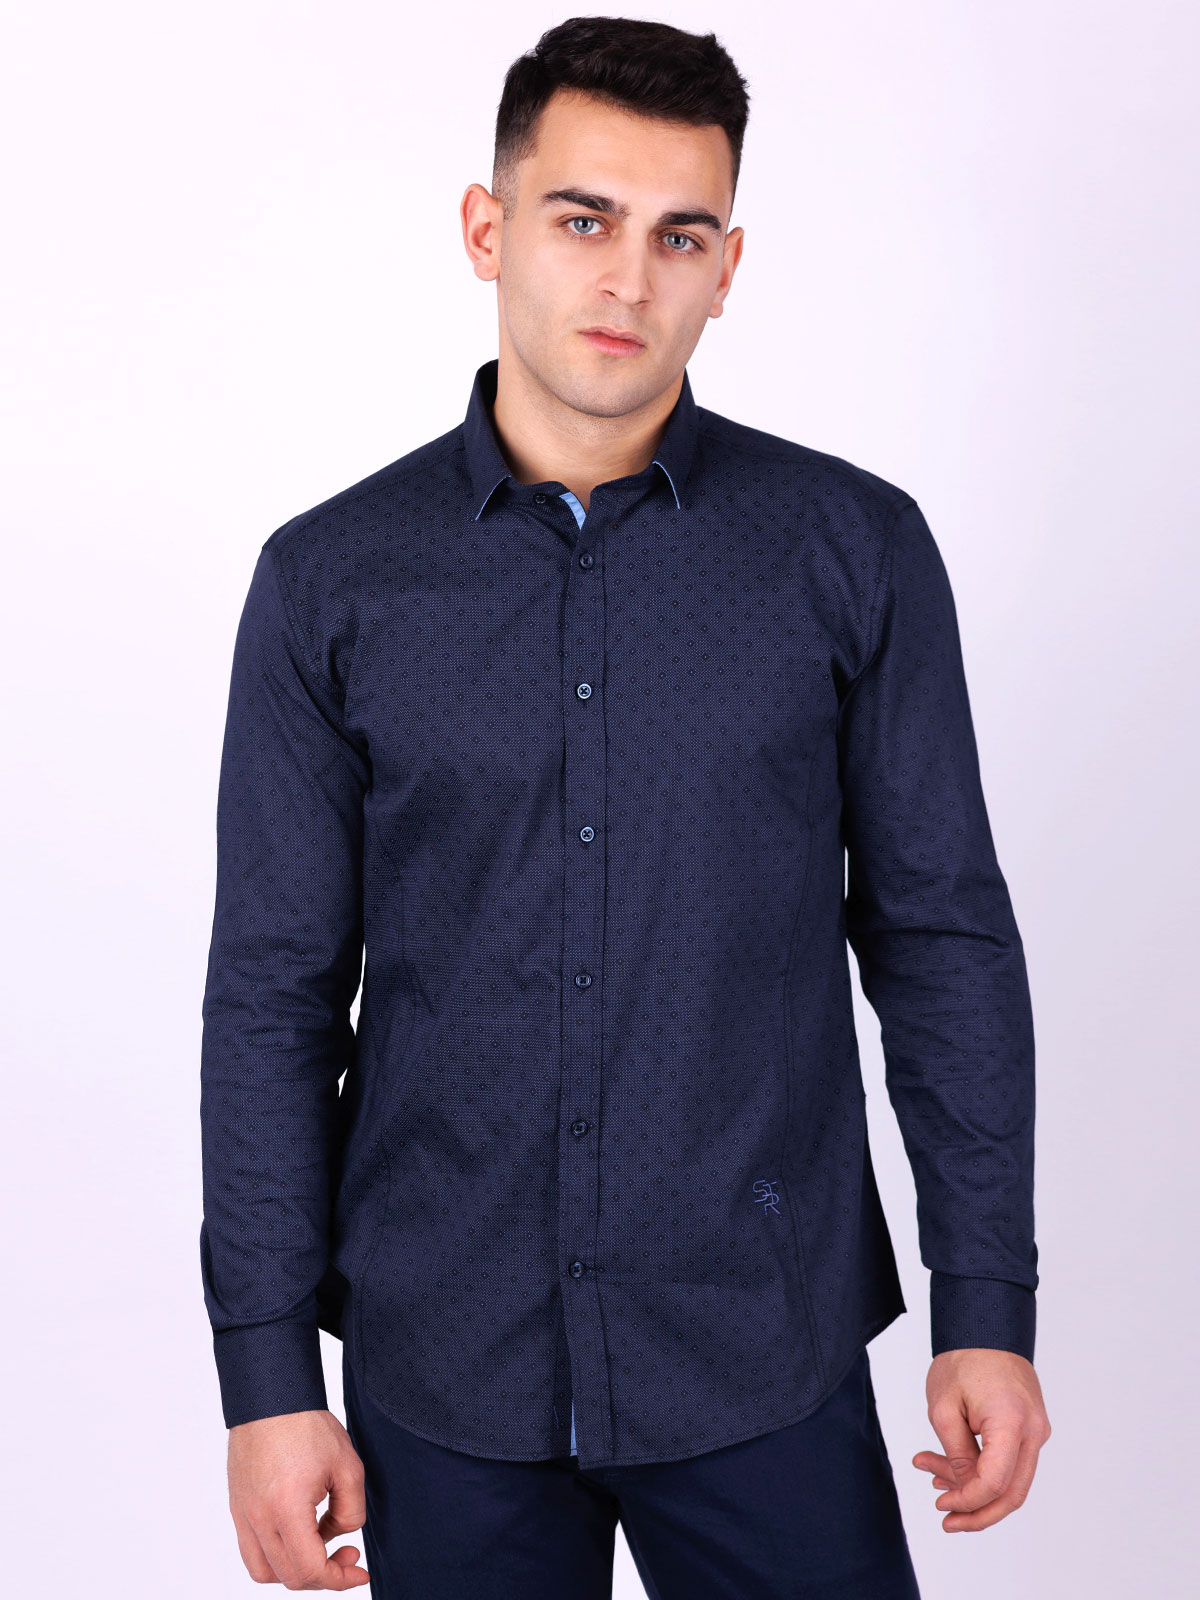 Shirt in dark blue with a figure pattern - 21536 € 43.87 img3